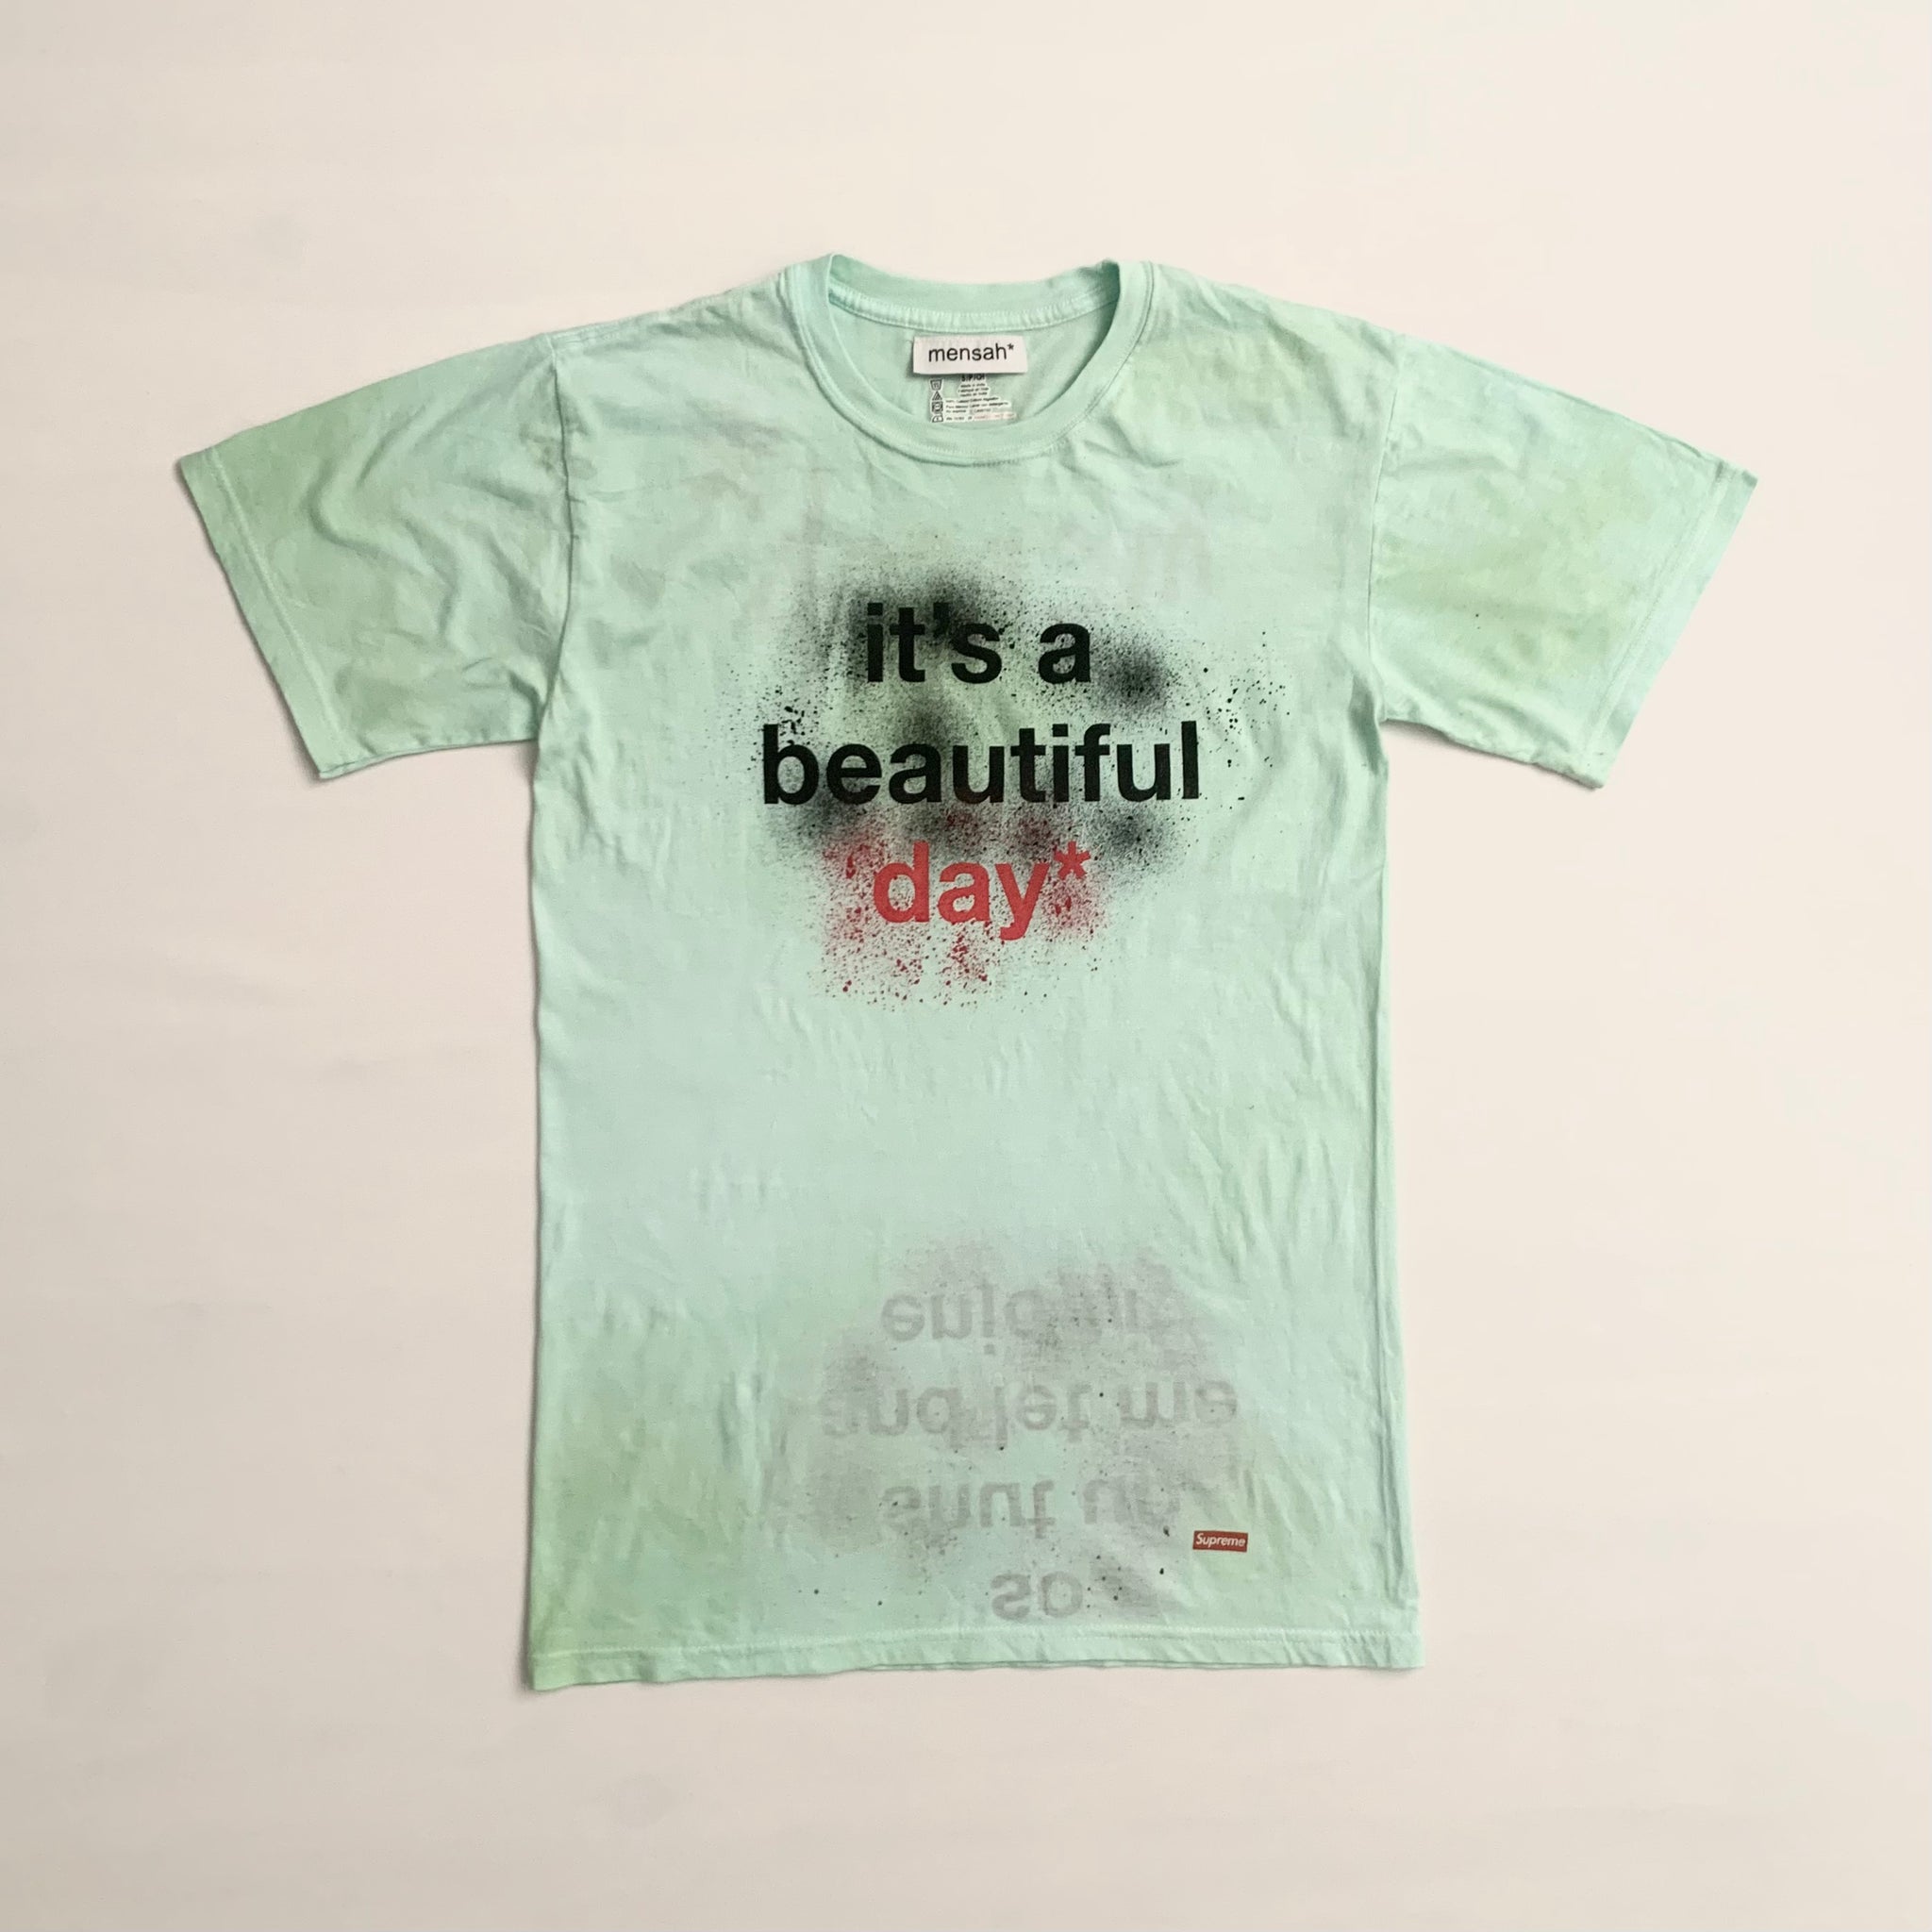 It's a beautiful day* Supreme/Hanes Tee - S